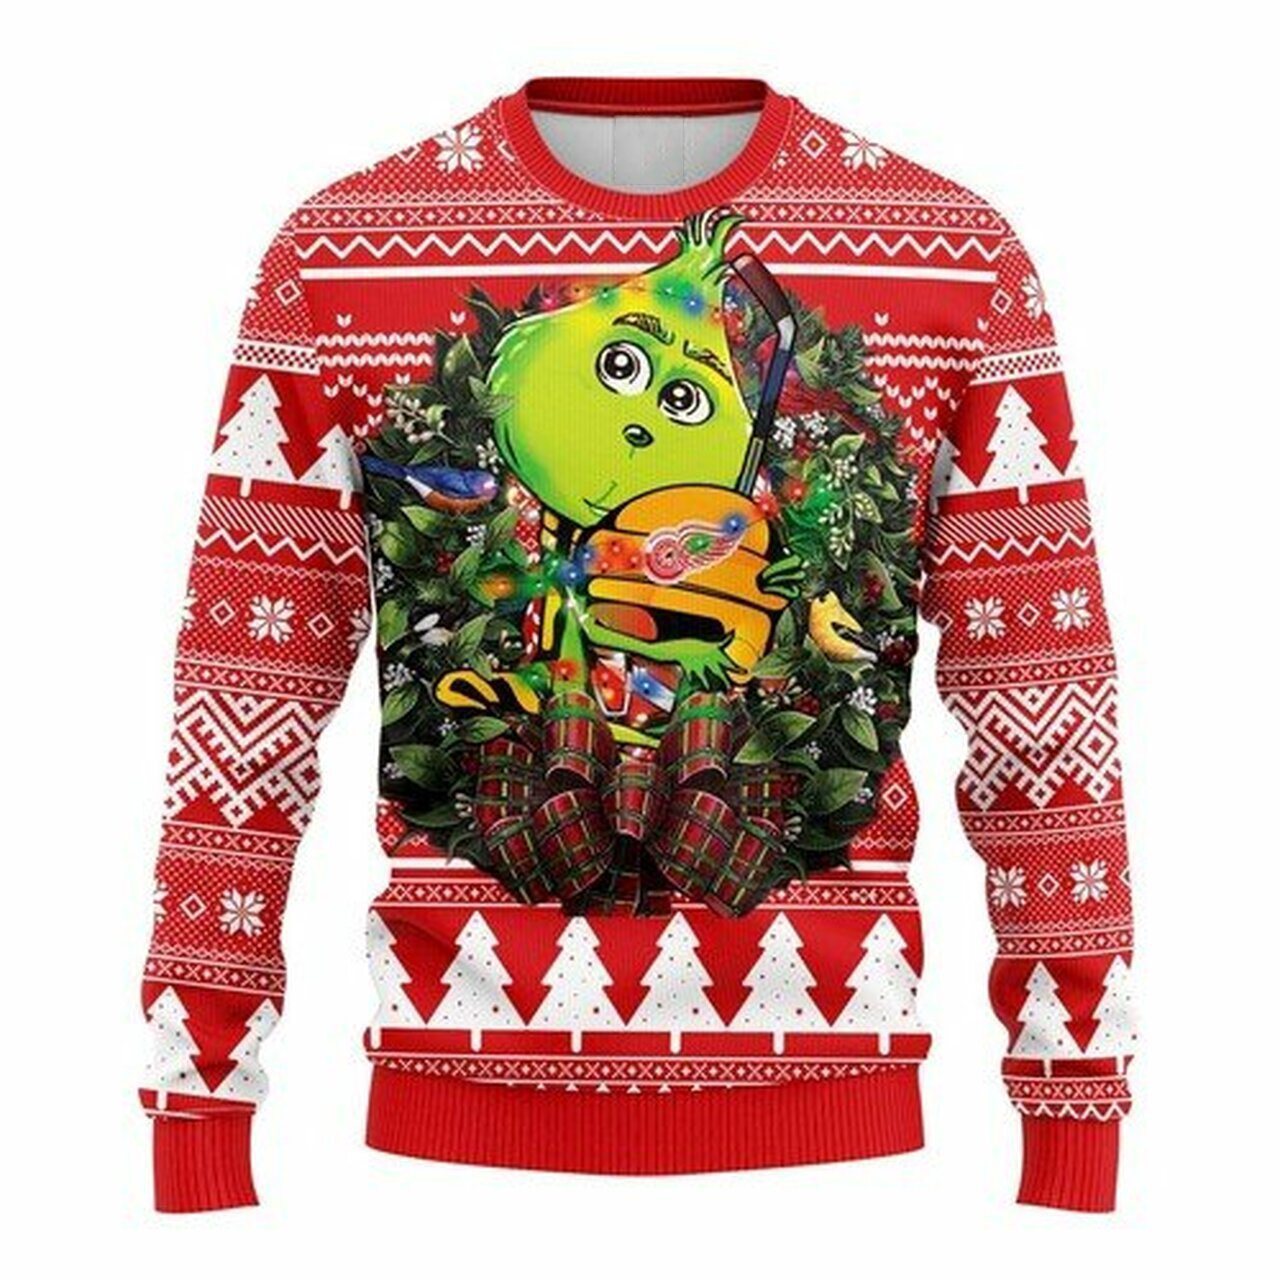 NHL Detroit Red Wings Grinch hug ugly christmas sweater